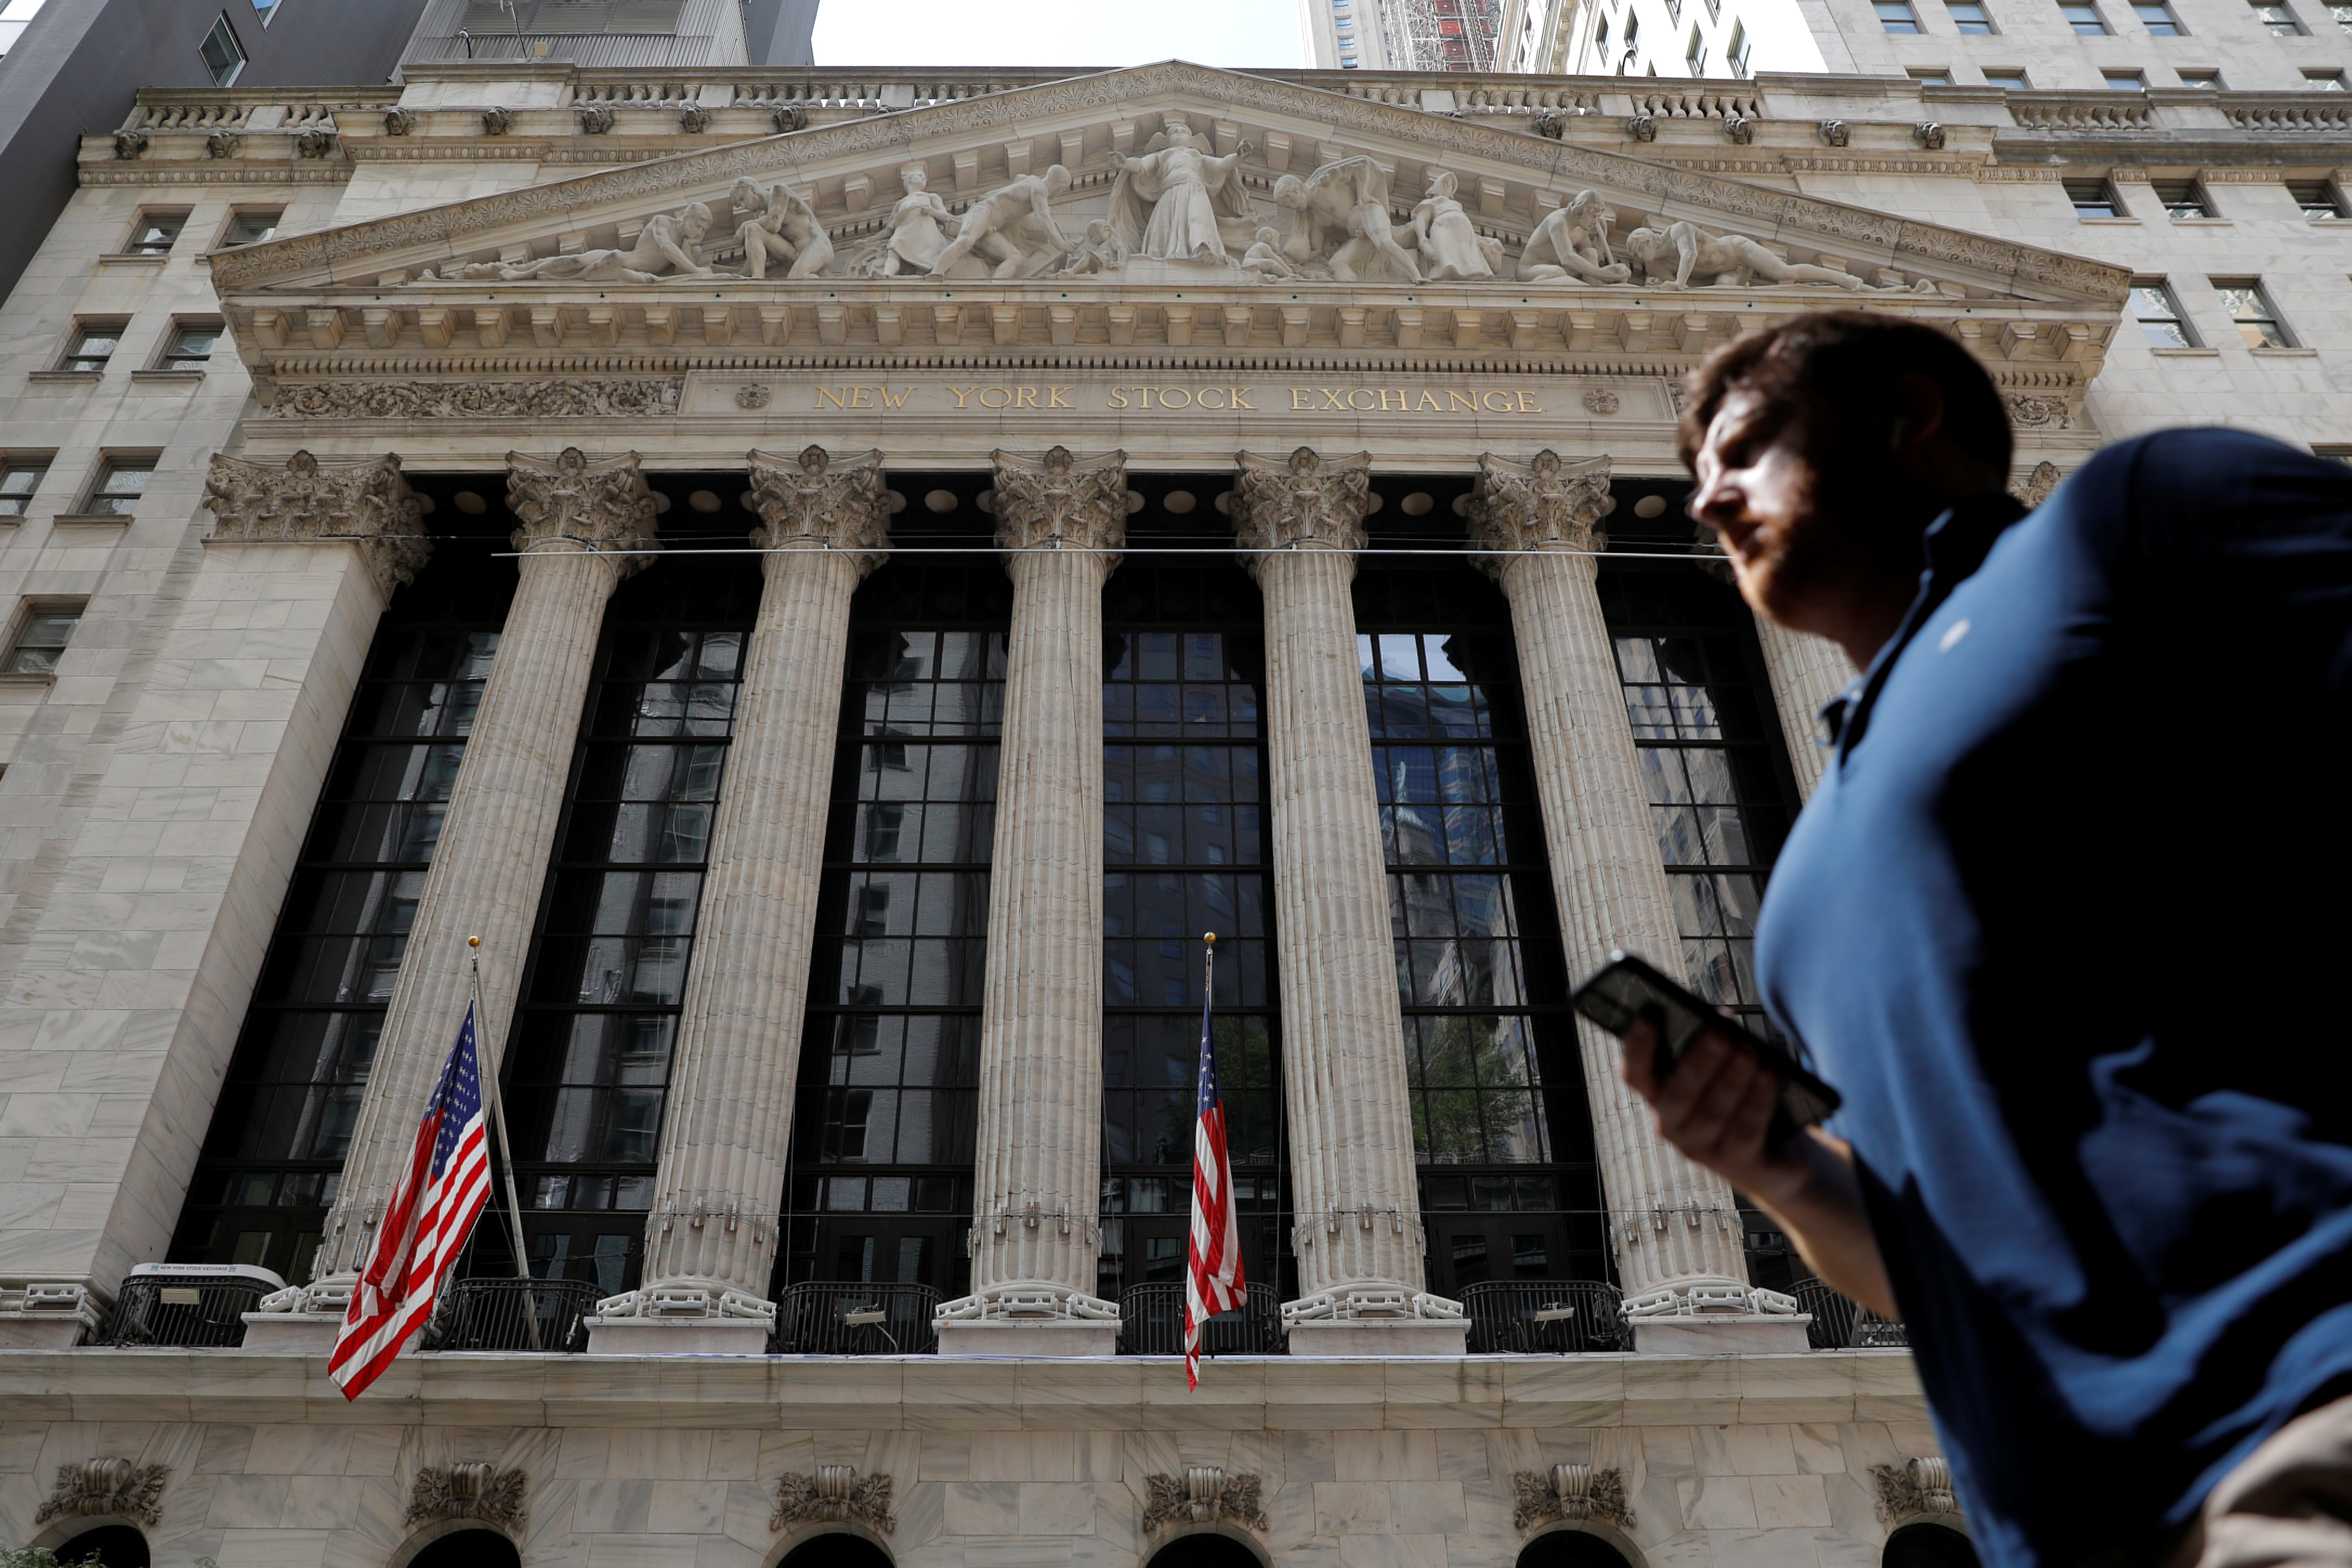 A person walks by the New York Stock Exchange (NYSE) in New York City, New York, U.S., July 19, 2021. REUTERS/Andrew Kelly